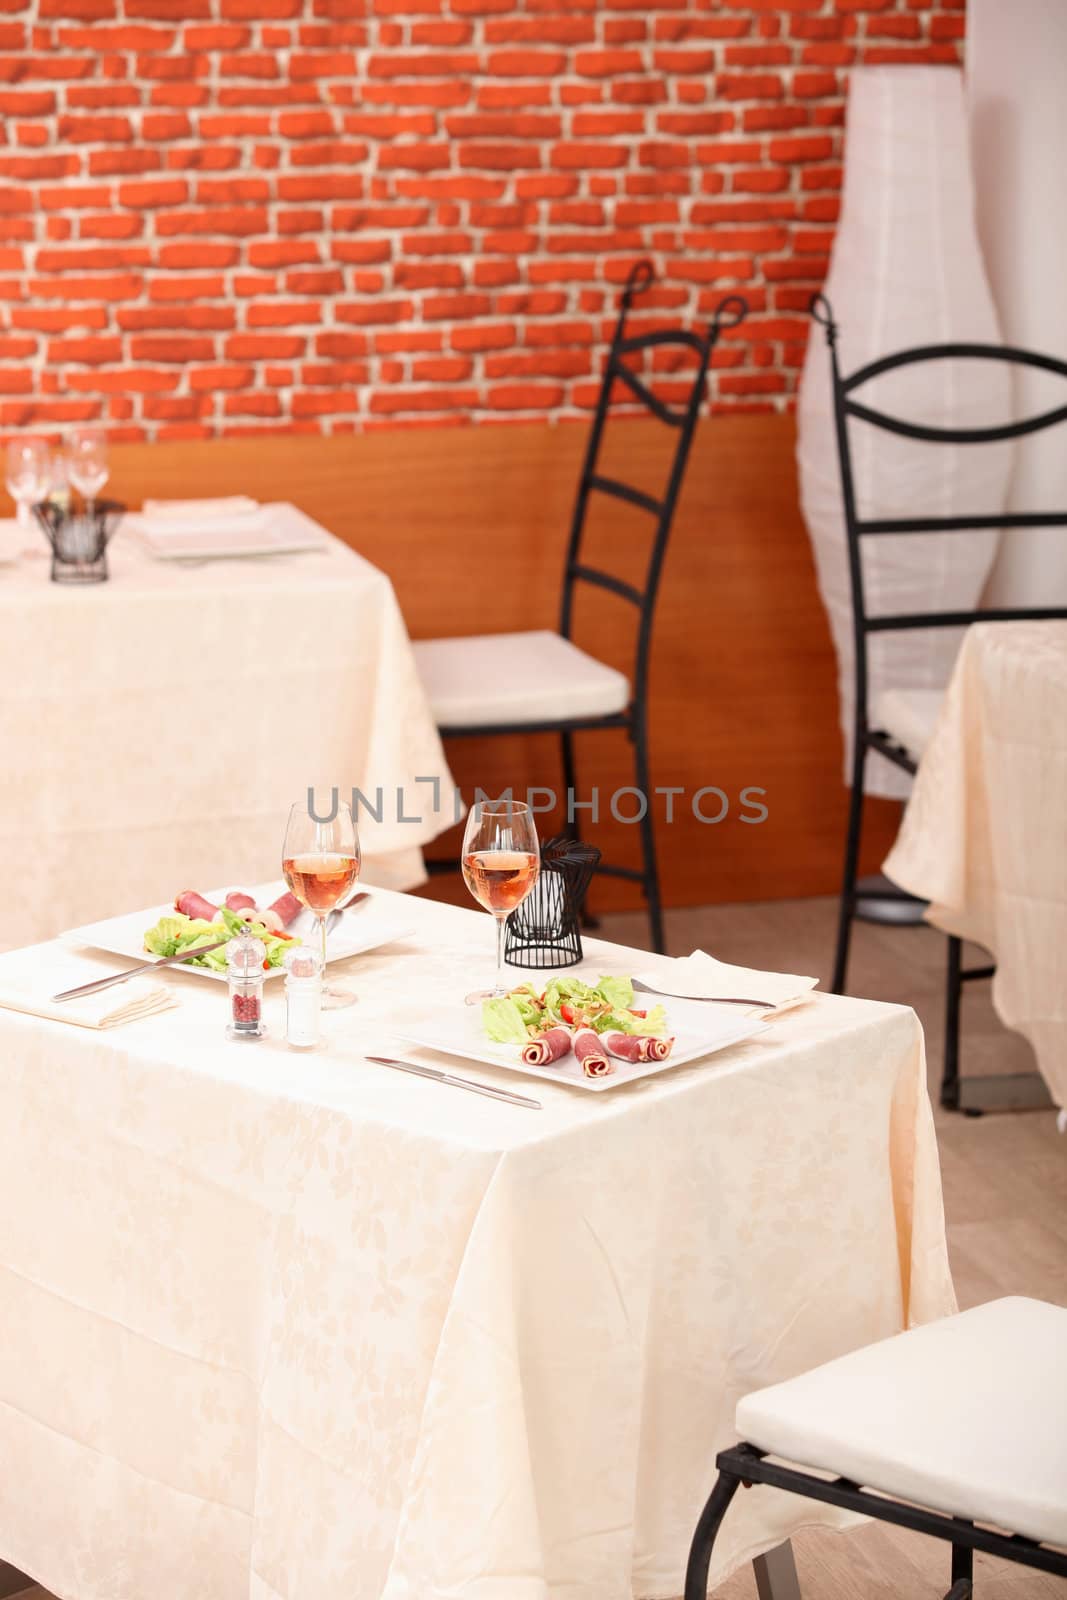 meal for two in a restaurant by phovoir